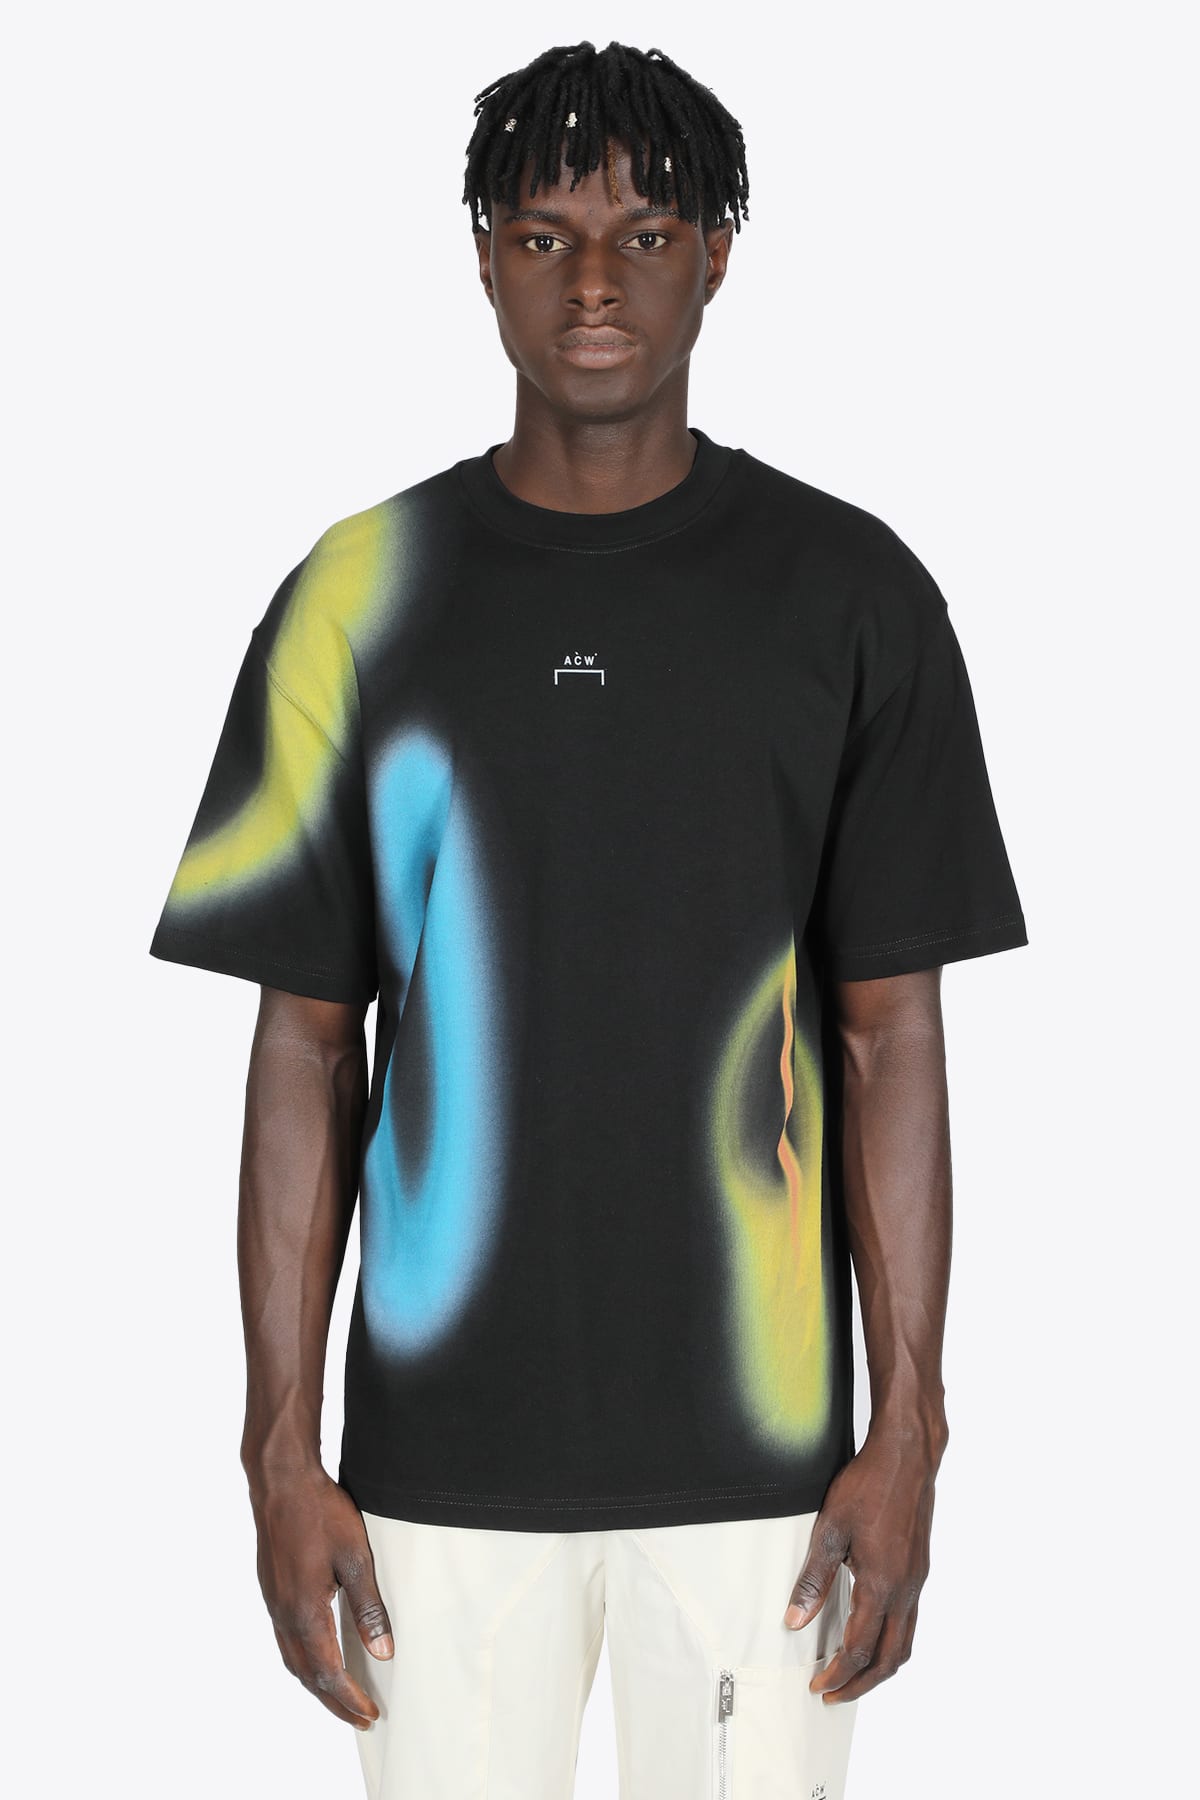 A-COLD-WALL Hypergraphic T-shirt Black cotton t-shirt with multicolor digital print